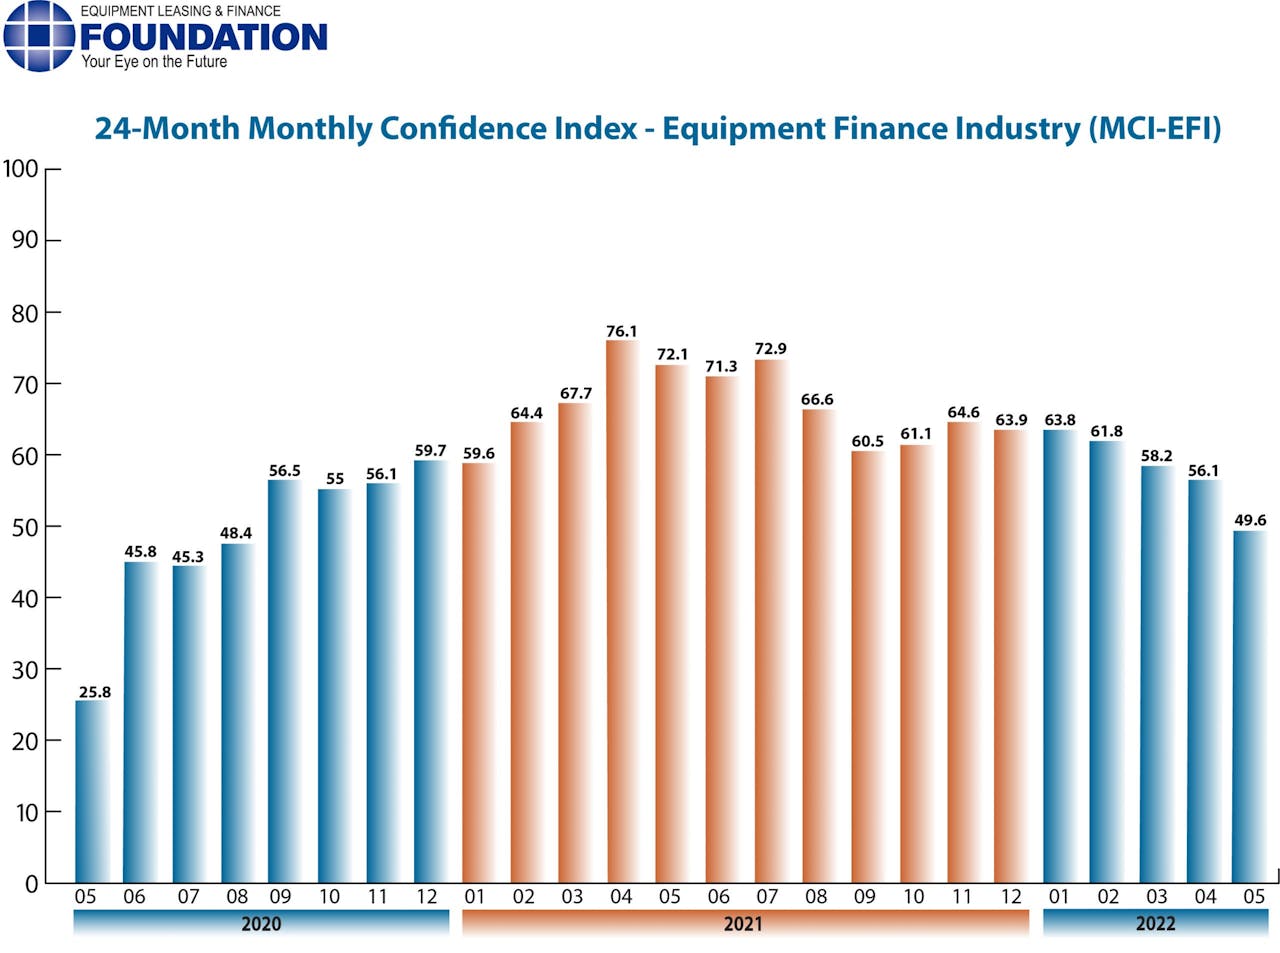 24-Month Monthly Confidence Index - Equipment Finance Industry